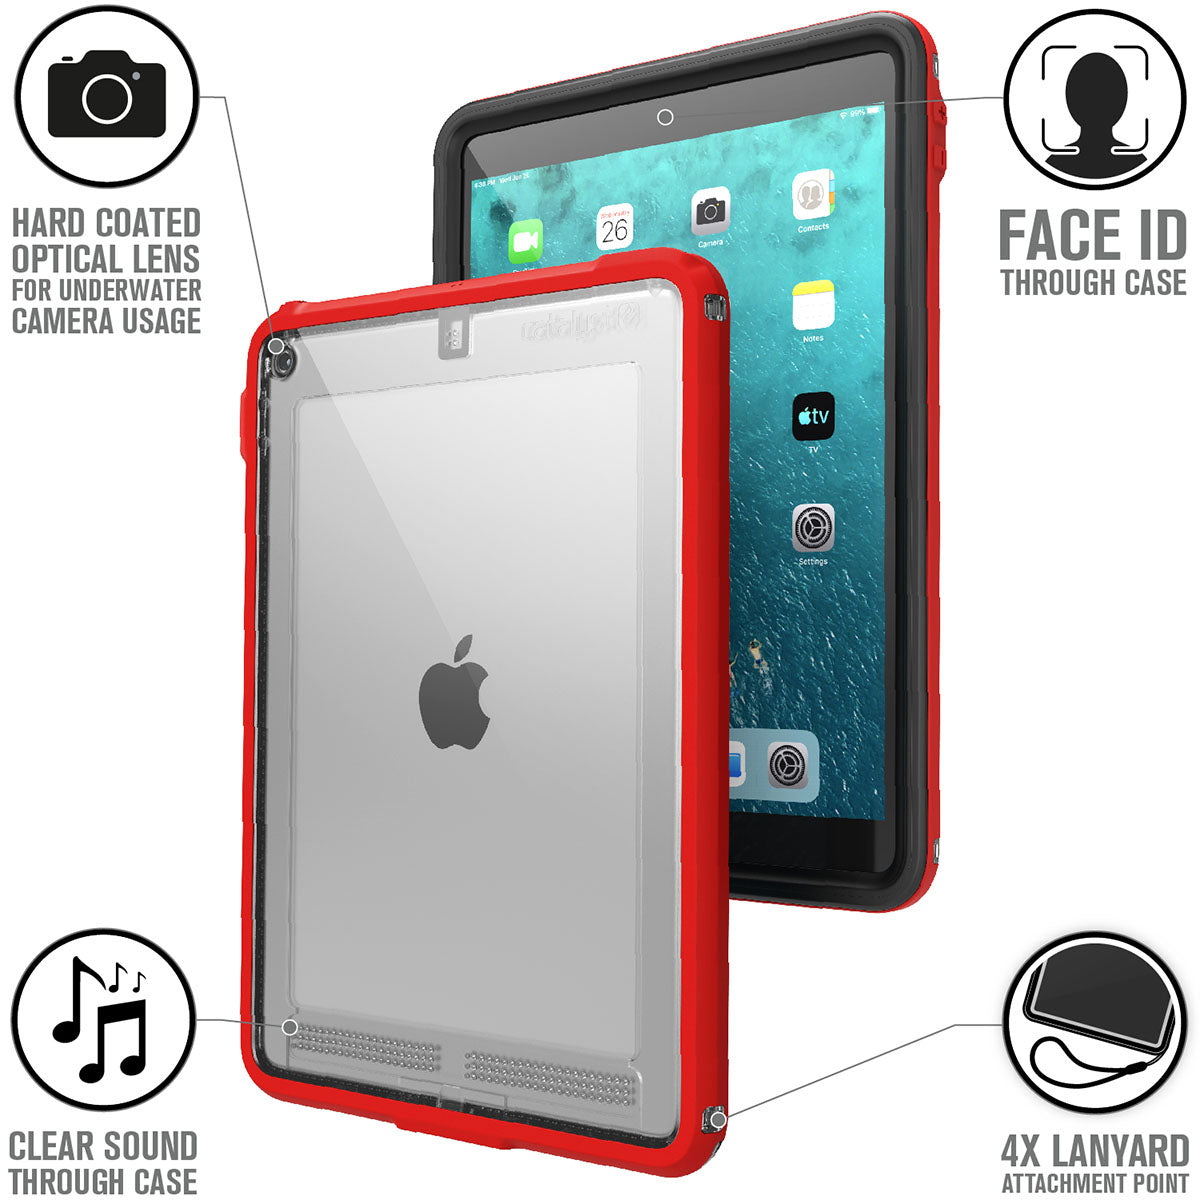 catalyst ipad air gen 3 10.5 waterproof case flame red front and back view text reads hard coated optical lens for underwater camera usage face id through case clear sound through case 4x lanyard attachment point